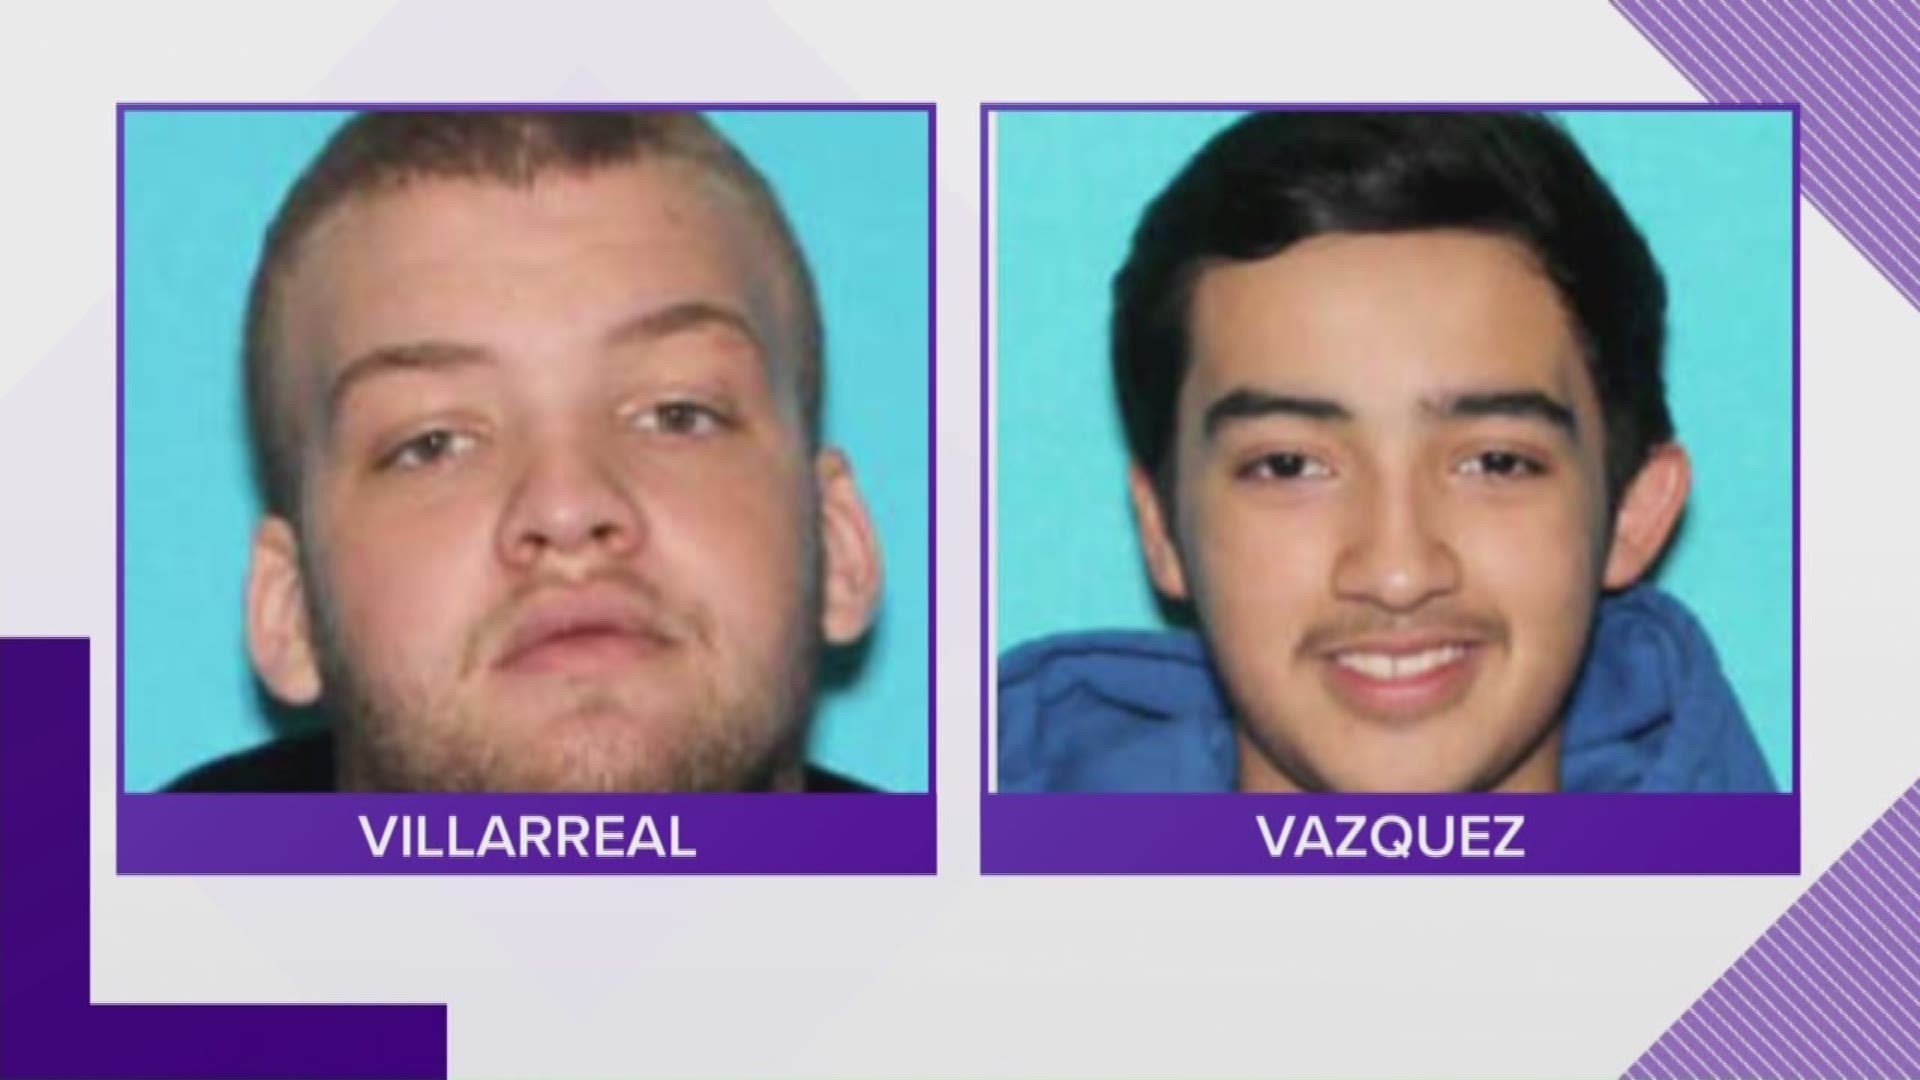 Authorities charge two suspects in a fatal parking lot hit-and-run.